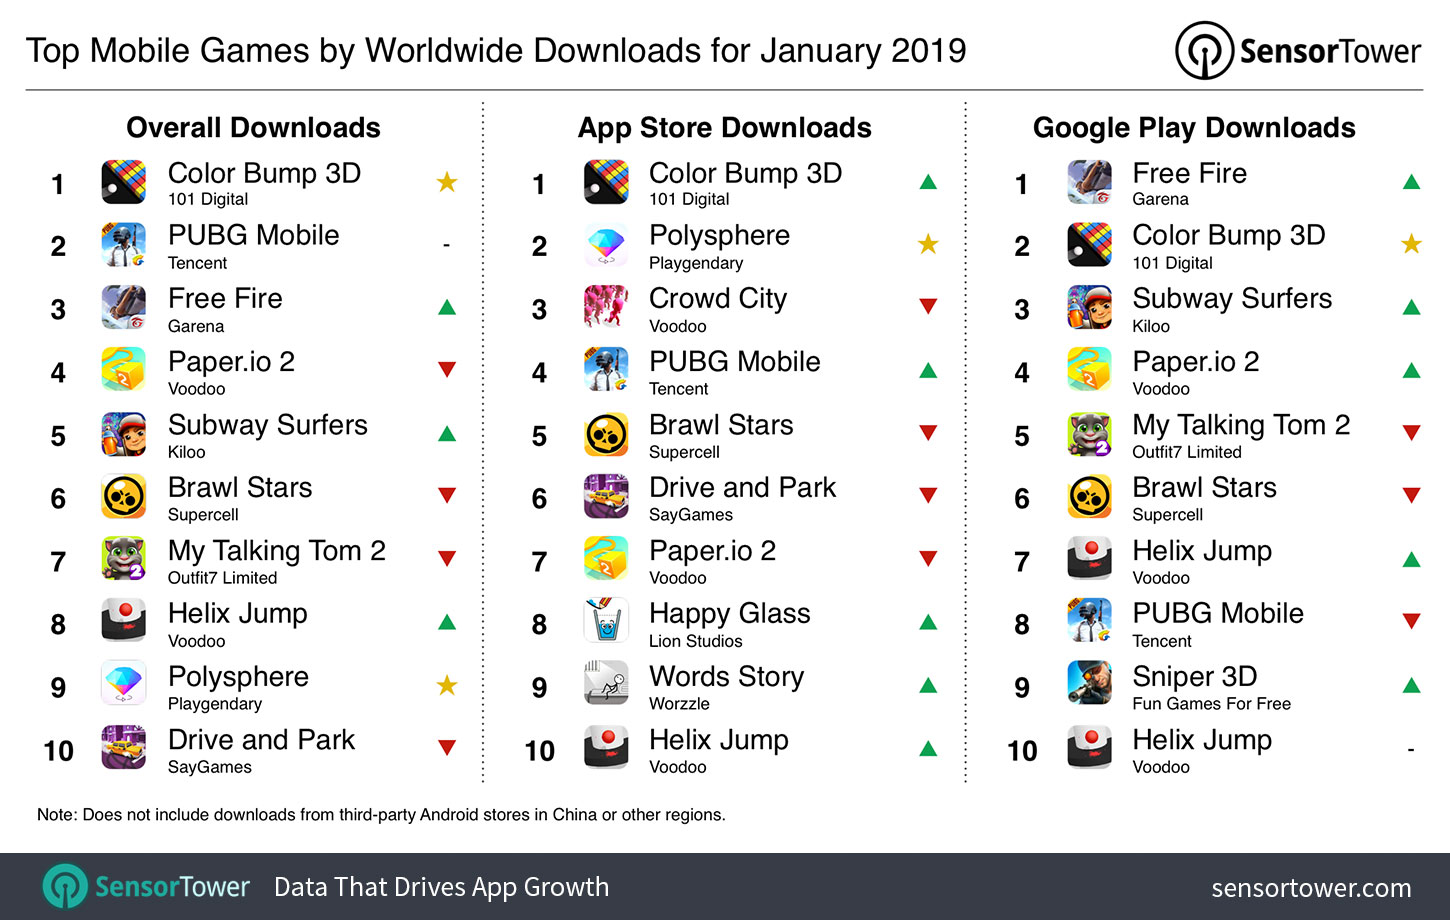 Top Mobile Games by Downloads for January 2019